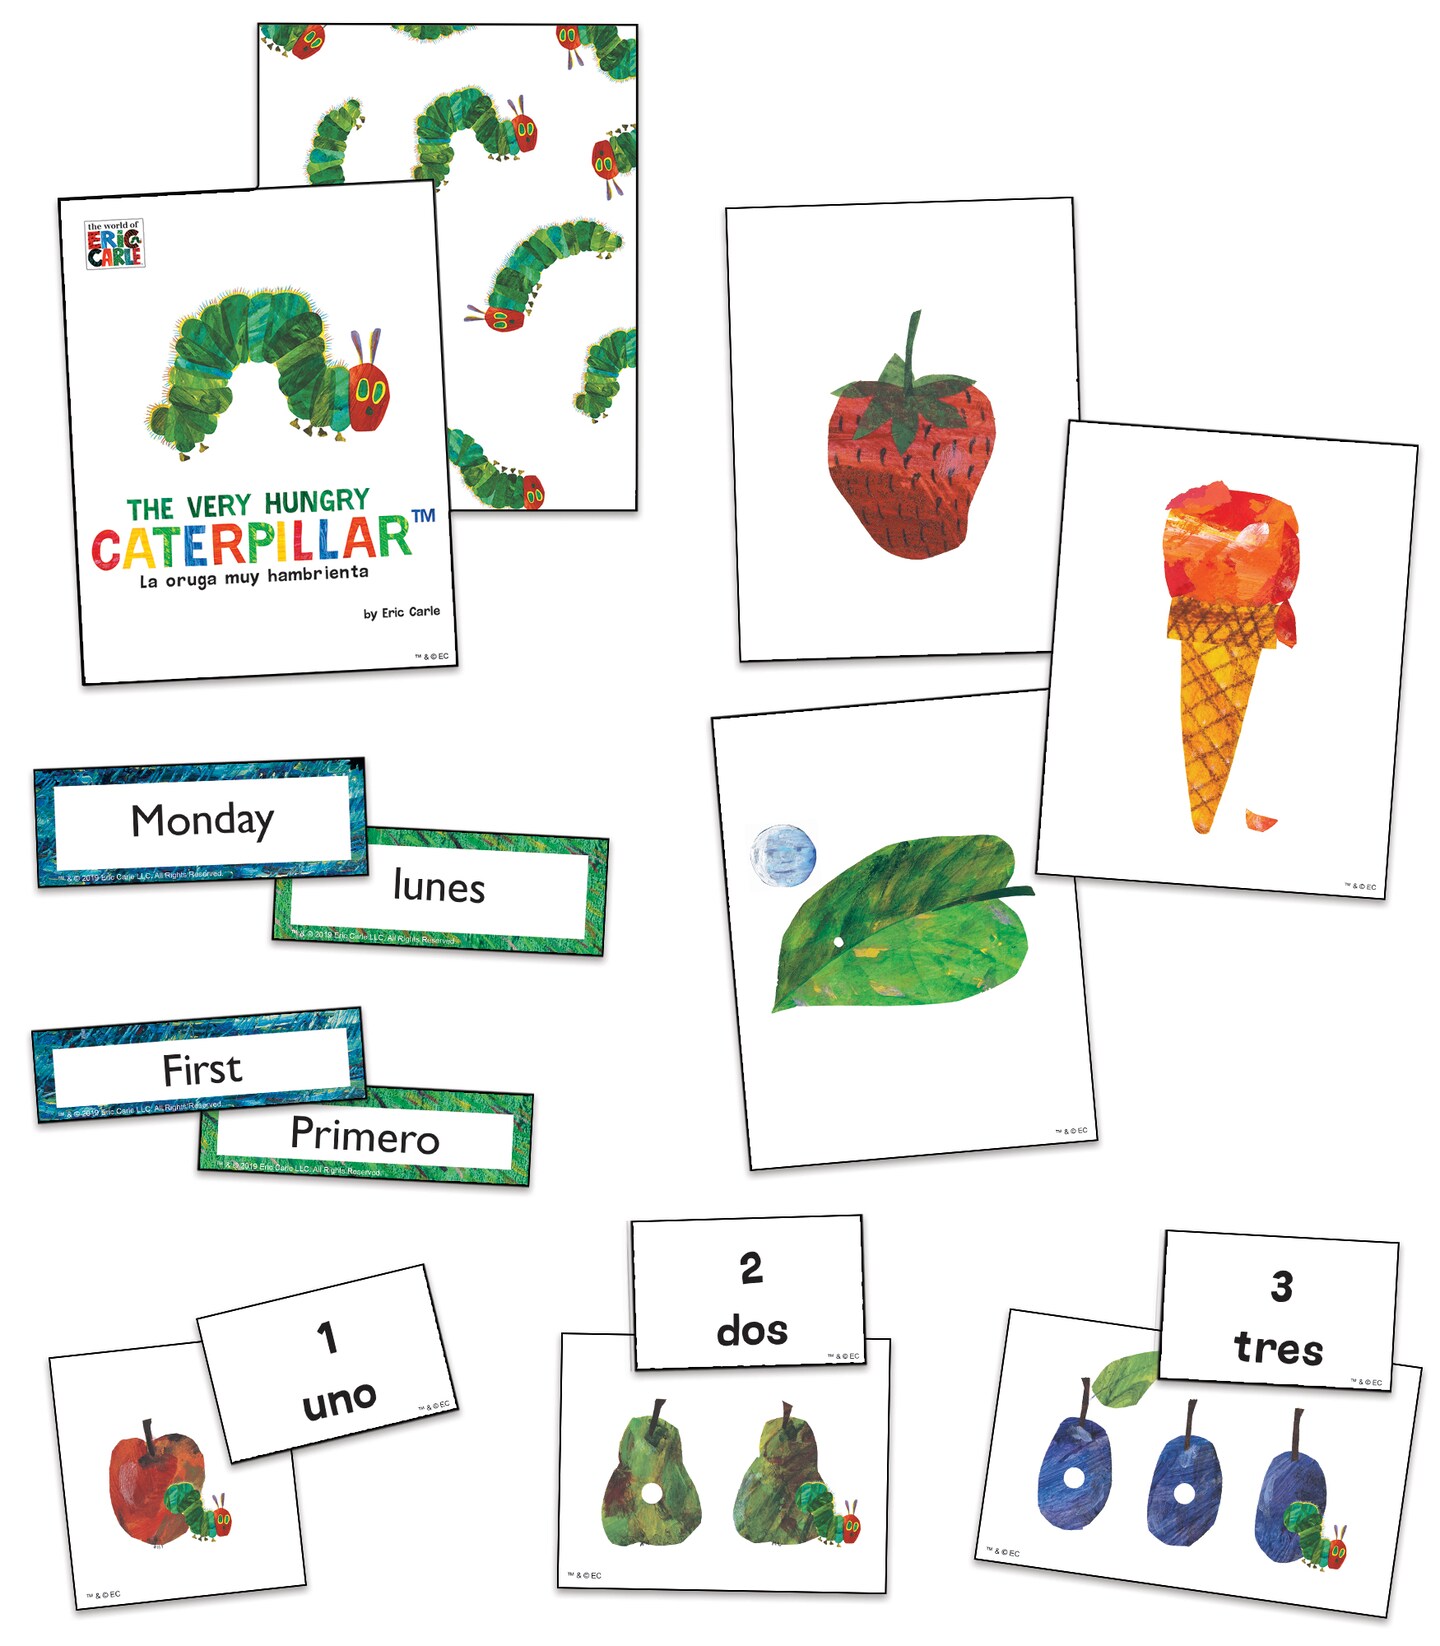 World of Eric Carle The Very Hungry Caterpillar Spanish Flash Cards for Toddlers, 65 Bilingual English and Spanish Flash Cards for Kids Covering The Very Hungry Caterpillar Storybook, Numbers &#x26; More